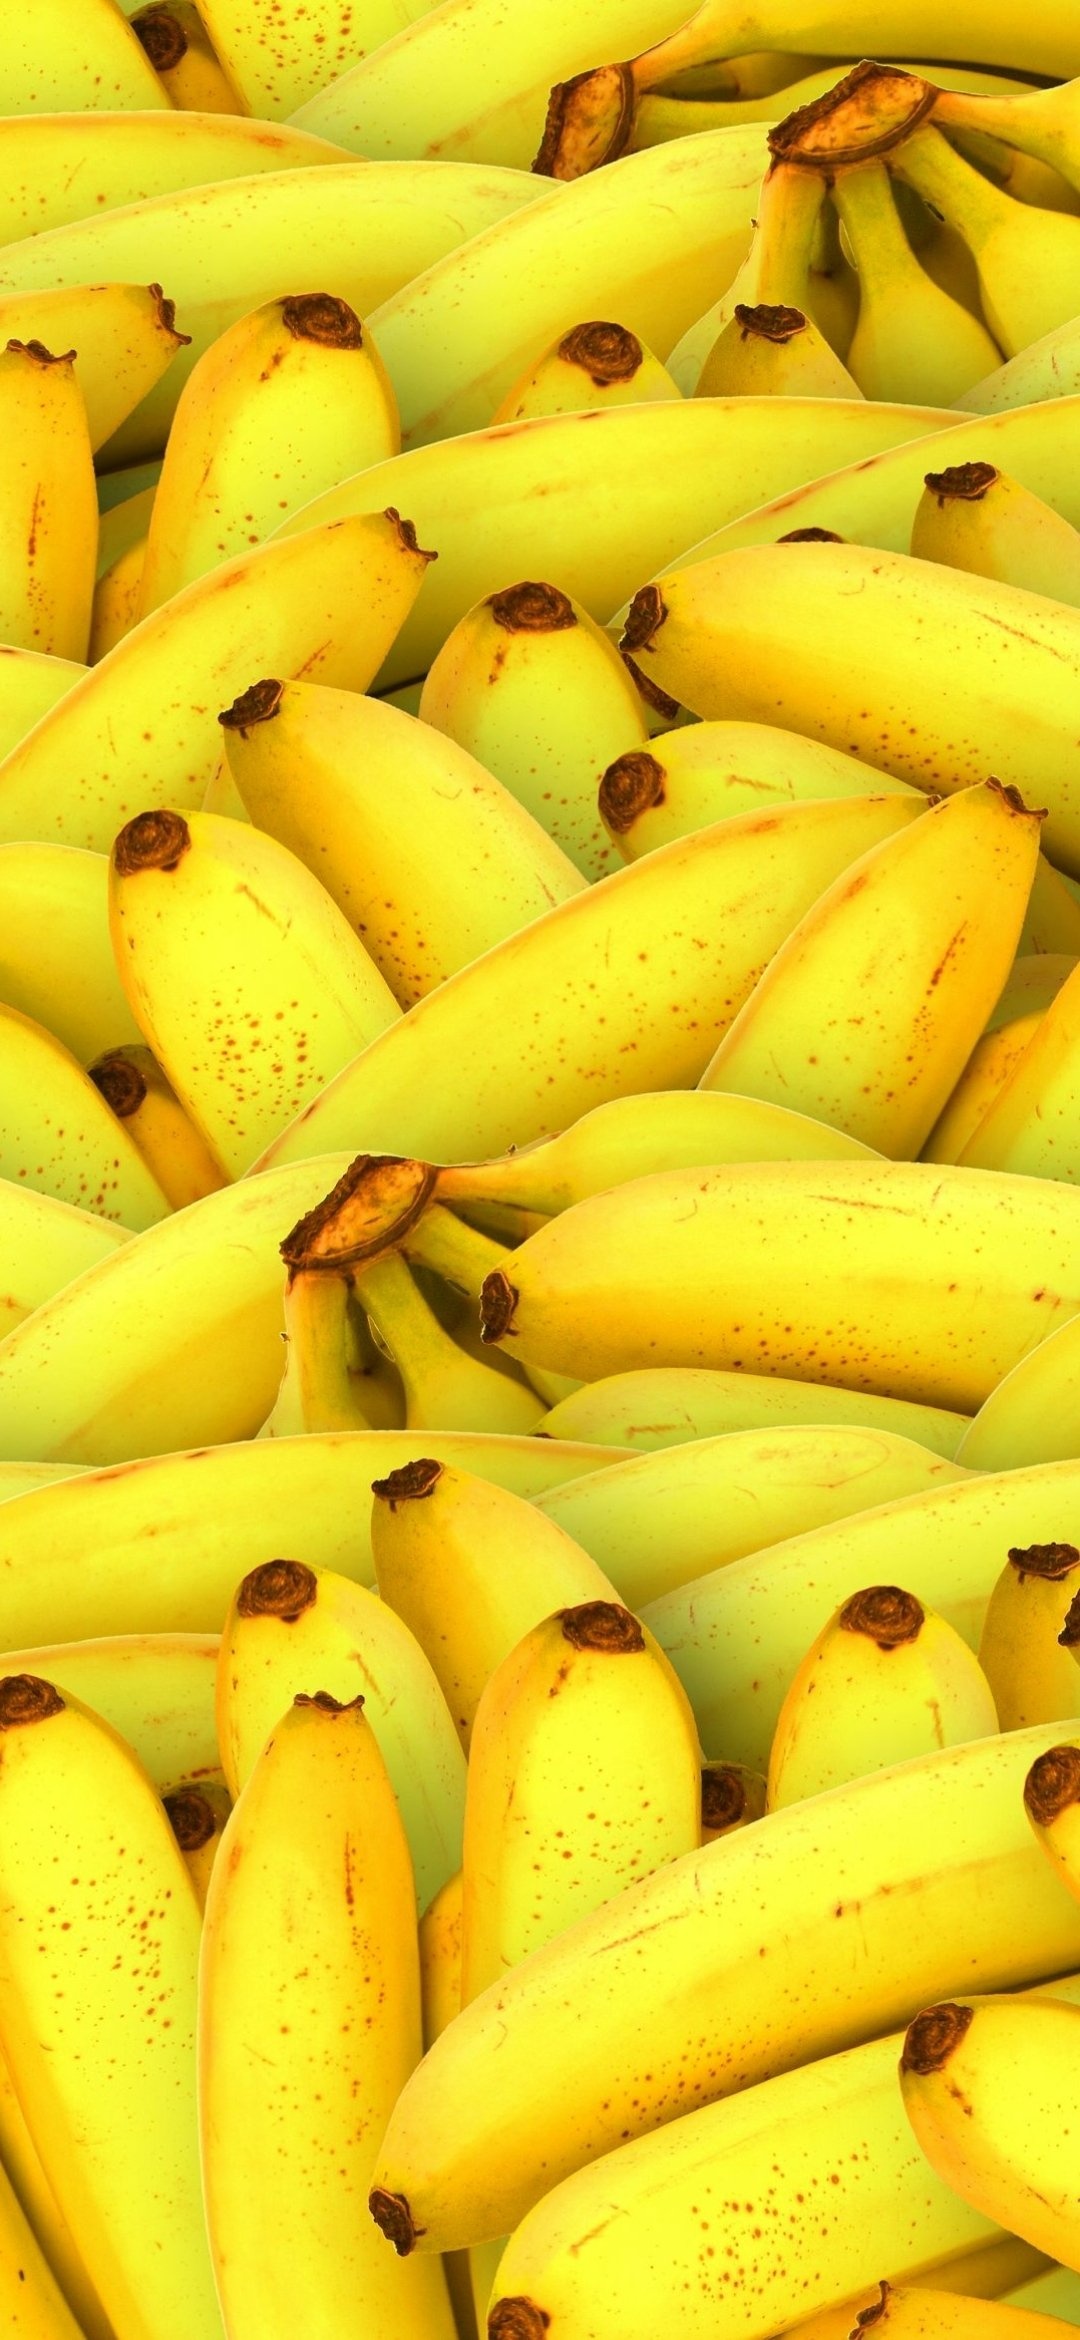 Banana feast, Culinary delight, Nutritious goodness, Finger-licking satisfaction, 1080x2340 HD Phone